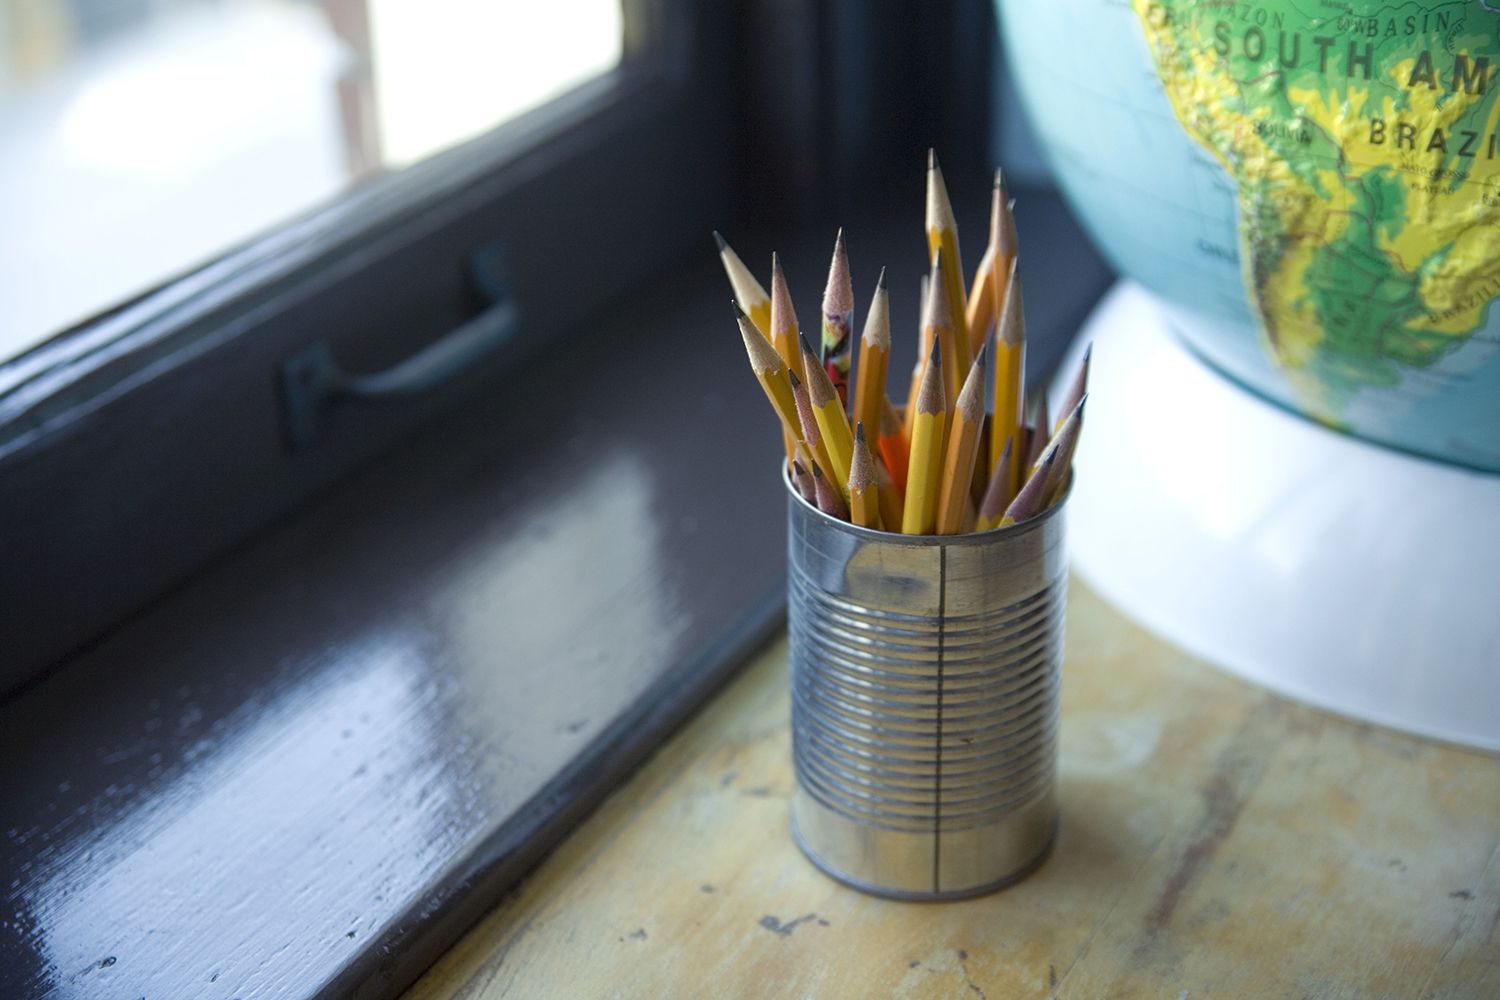 Can of Pencils